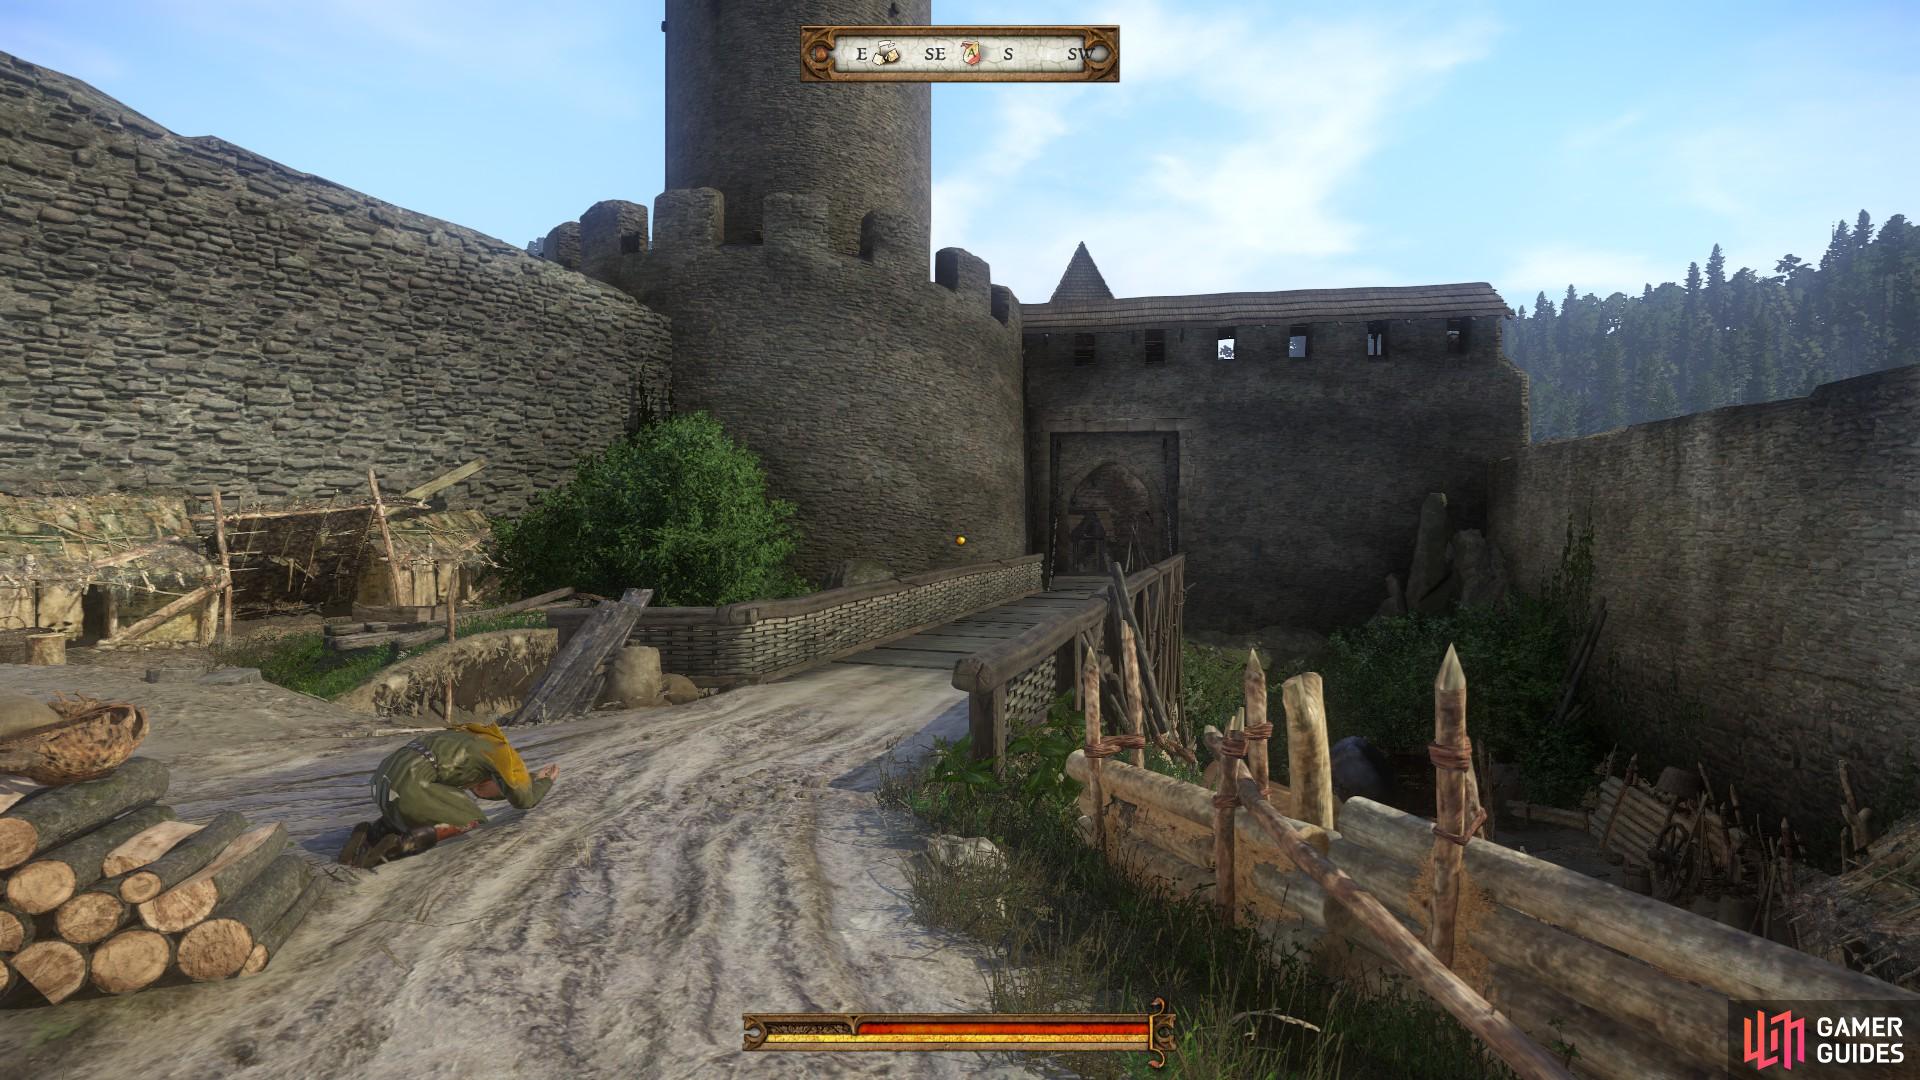 As you enter Rattay through the lower gate, turn right and cross the bridge to enter Pirkstein.